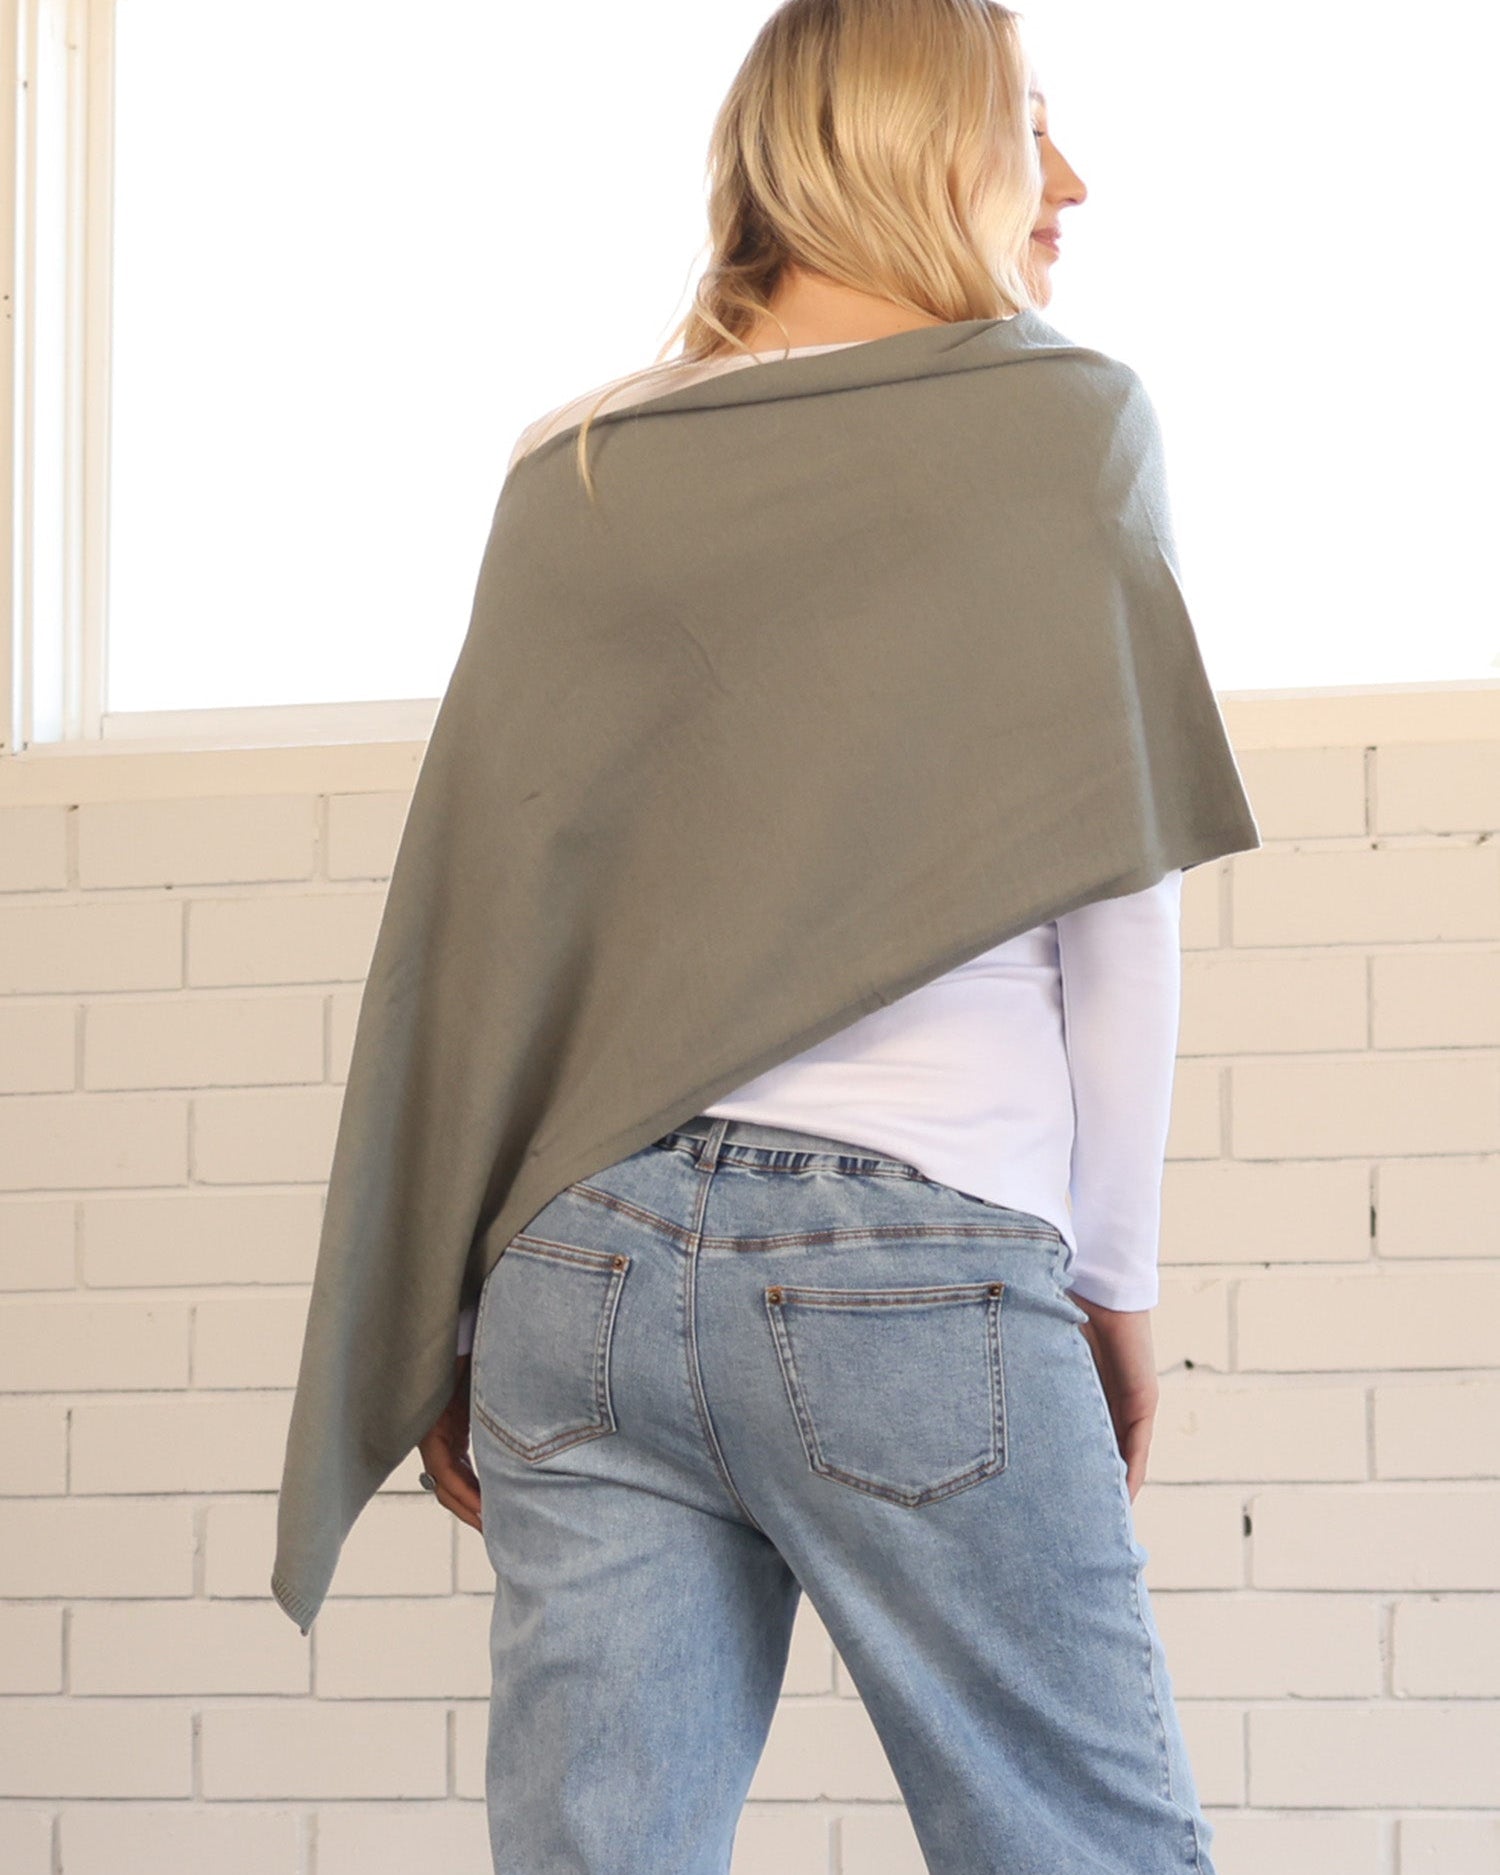 Back view - Moozie Mama Luxury Poncho/Scarf Maternity & Nursing Cover in Sage Green (6723877601374)